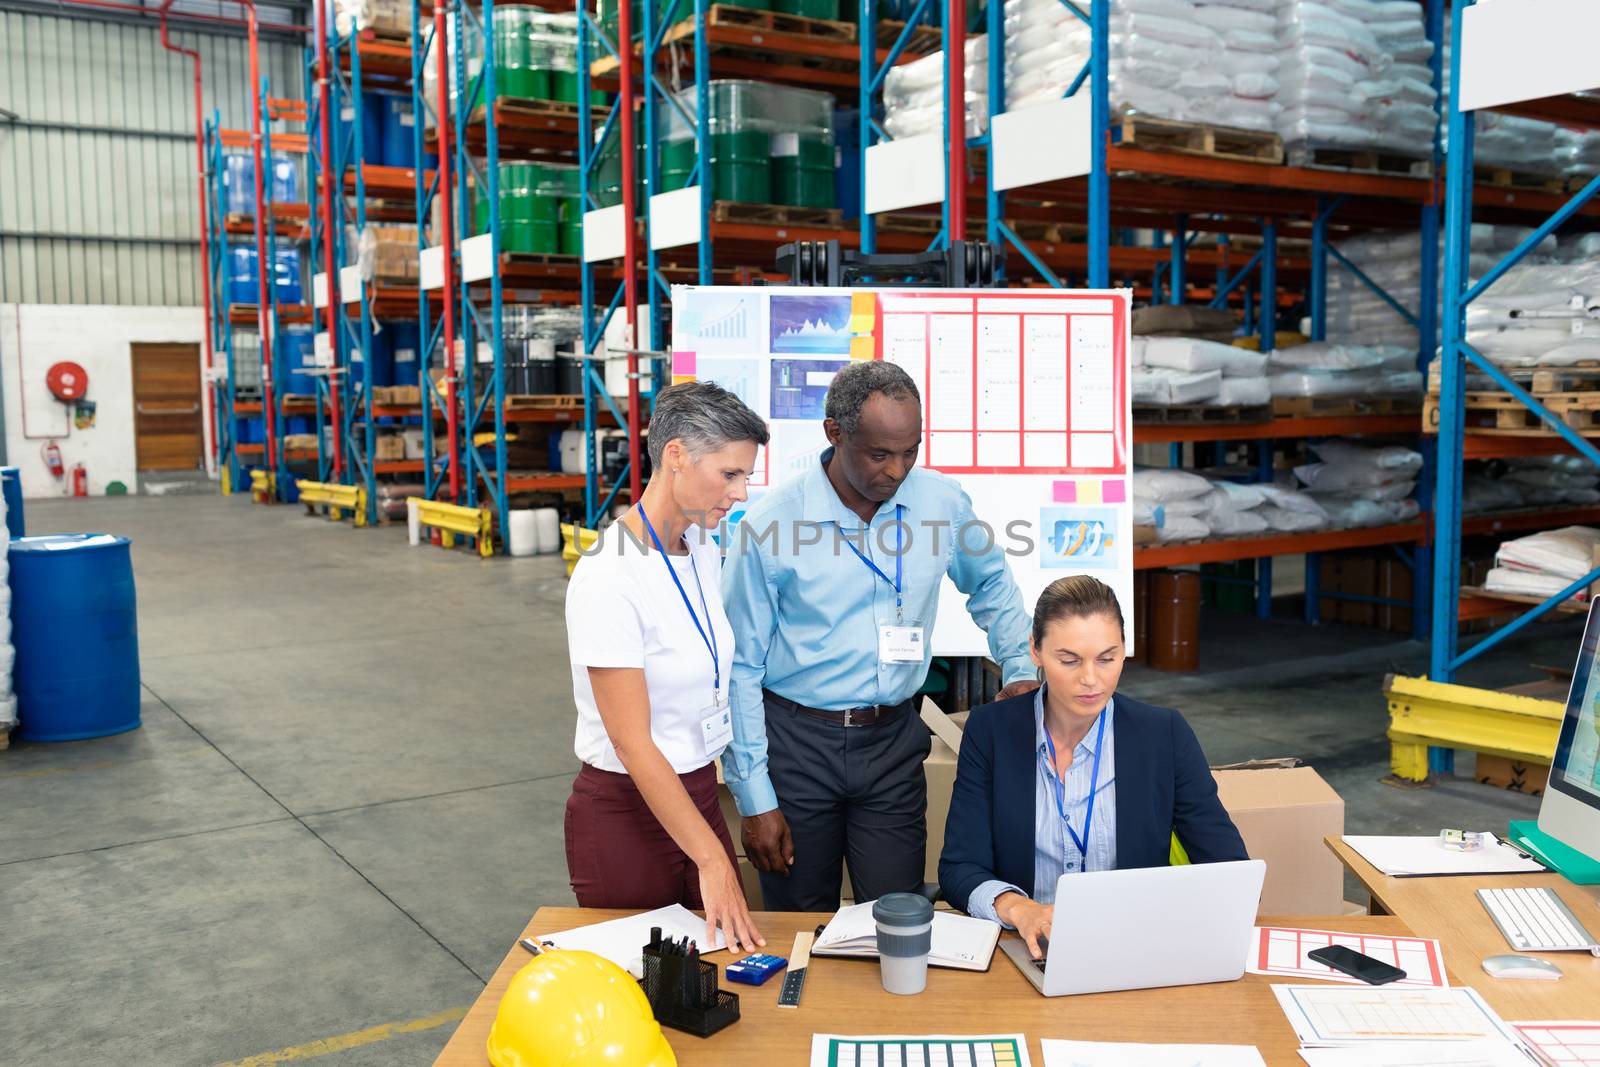 Front view of beautiful Caucasian female manager with her diverse coworkers discussing over laptop at desk in warehouse. This is a freight transportation and distribution warehouse. Industrial and industrial workers concept